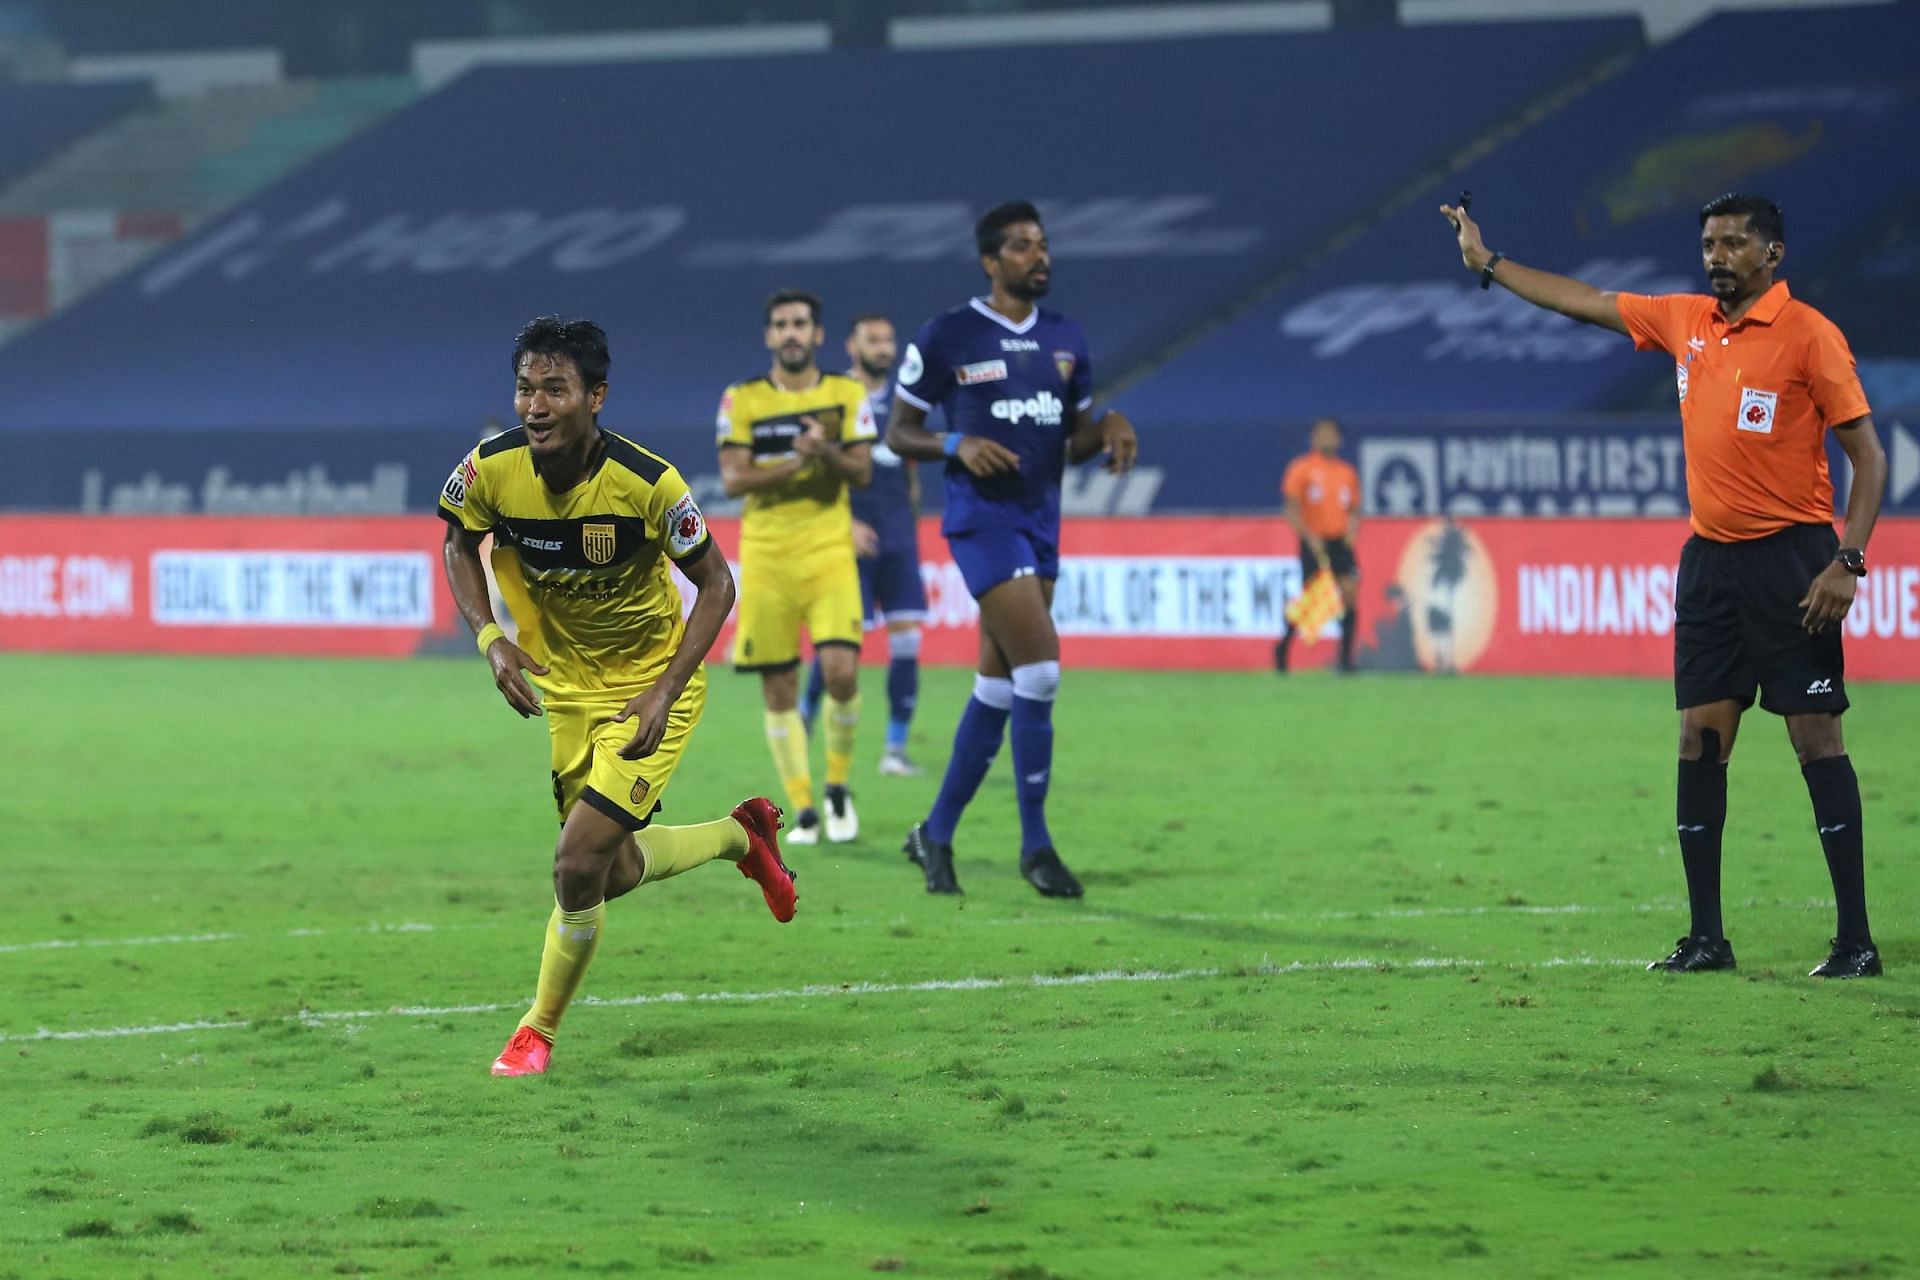 Halicharan Narzary of Hyderabad FC celebrates after scoring against Chennaiyin FC in ISL 2020-21 (Image Courtesy: Indian Super League)